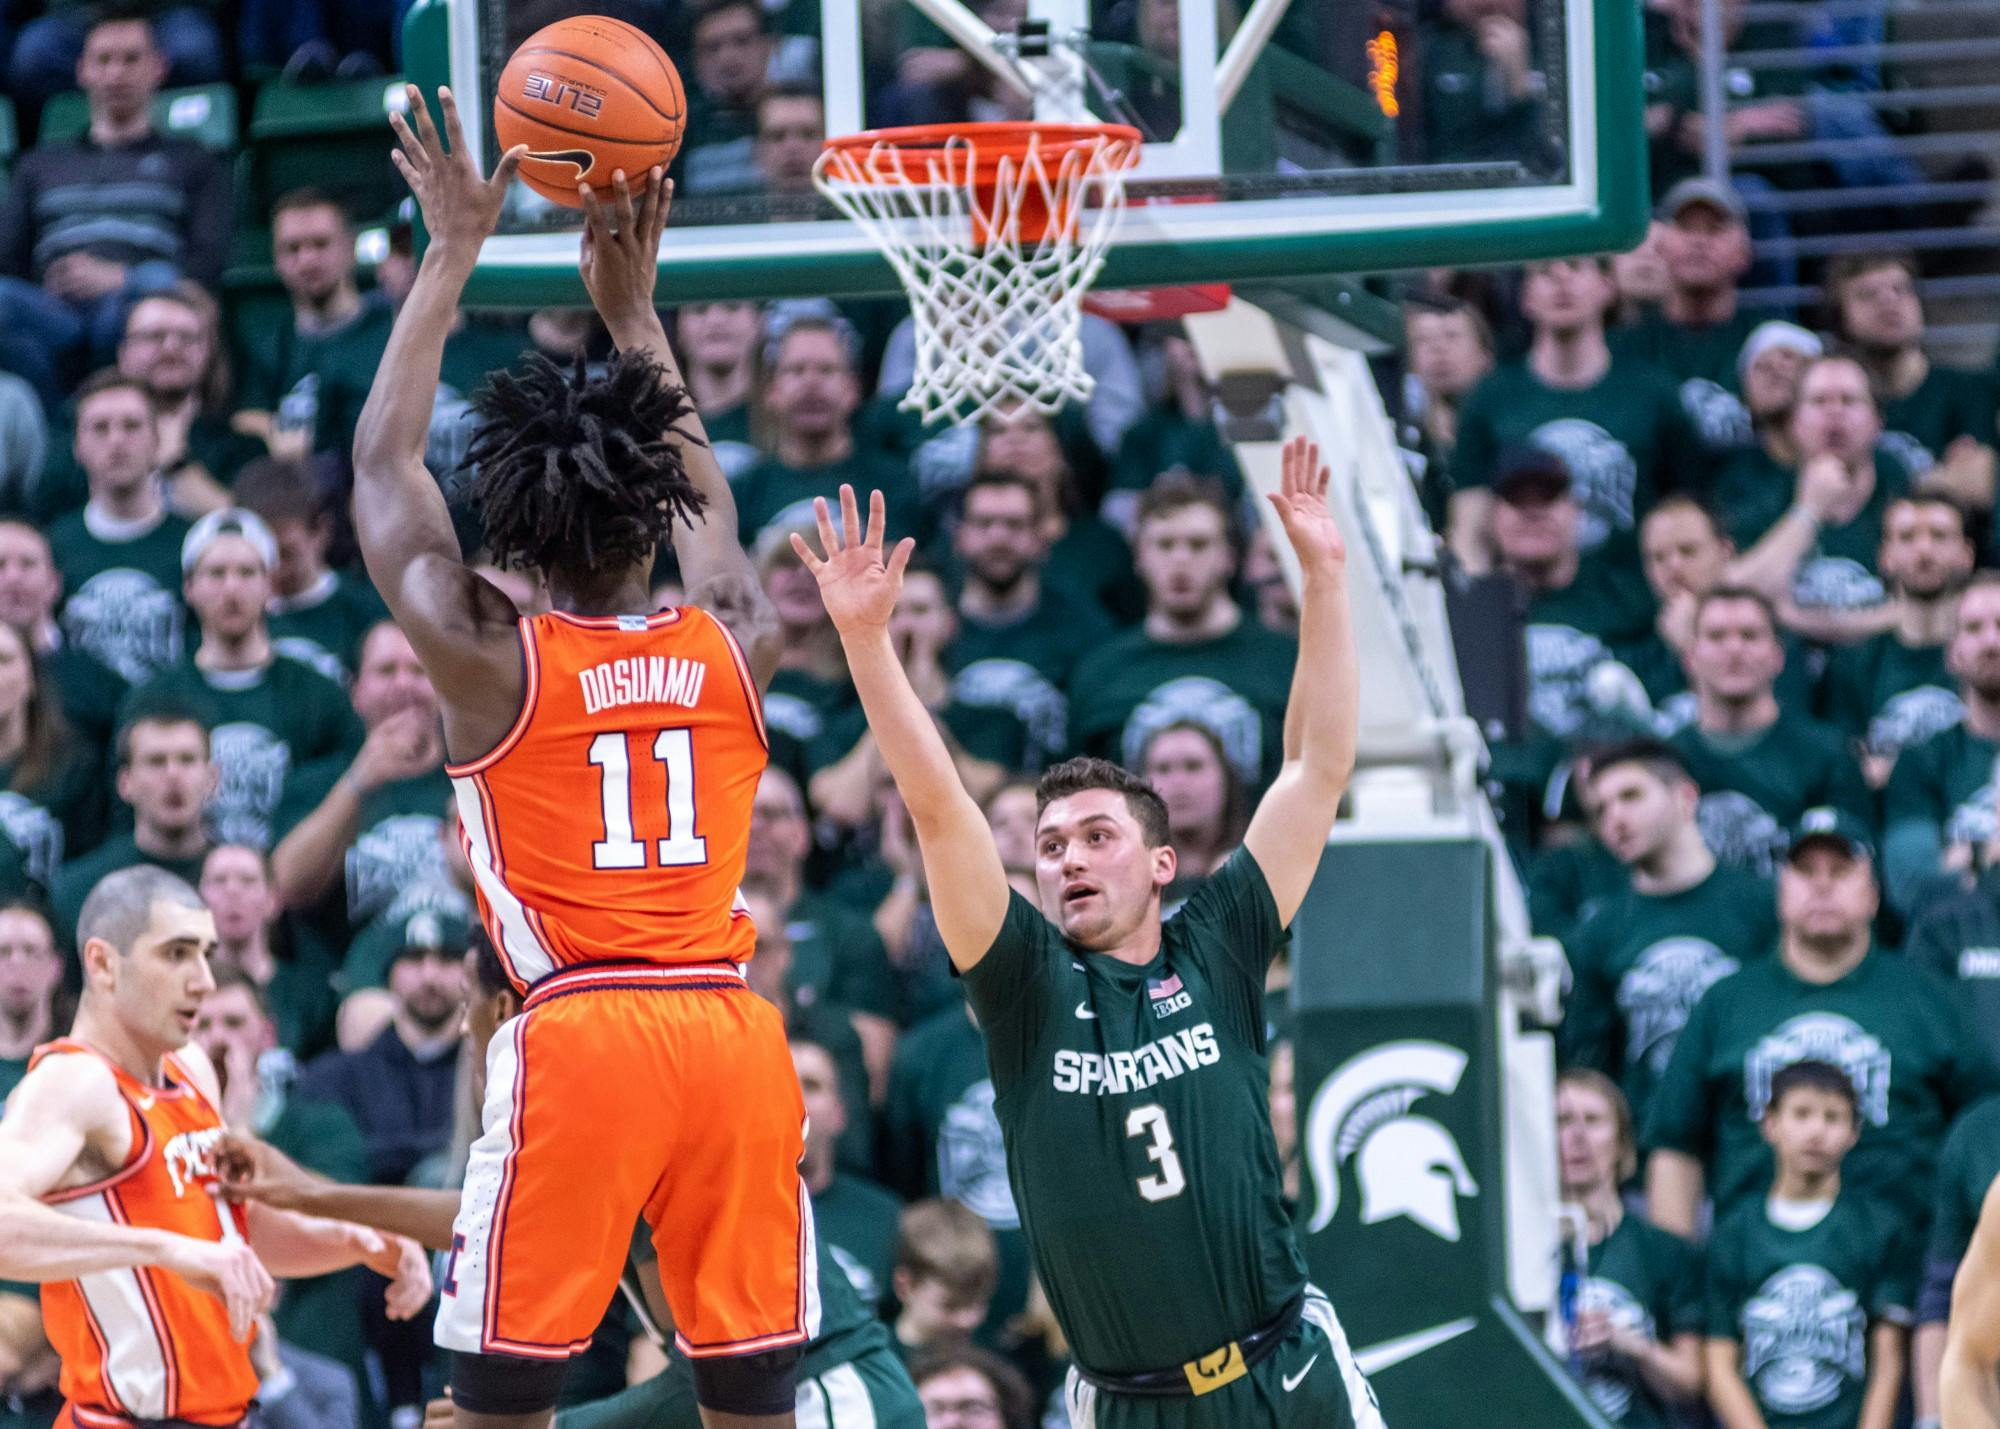 Illinois guard Ayo Dosunmu (11) shoots over sophomore guard Foster Loyer (3). The Spartans defeated the Illini, 76-56, at the Breslin Student Events Center on January 2, 2020.